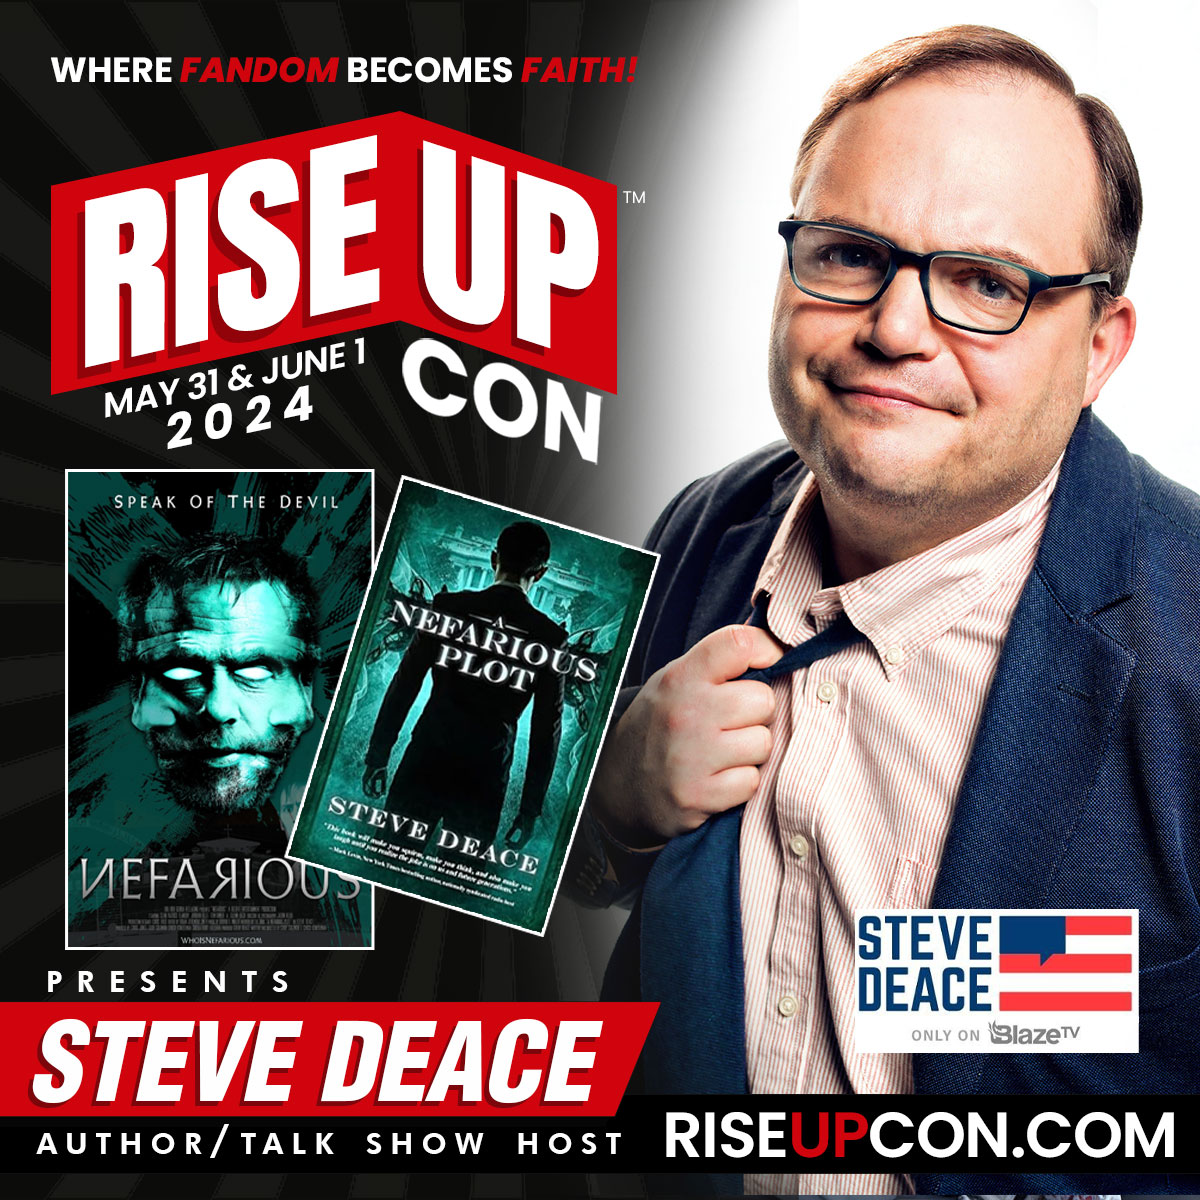 @SteveDeaceShow will be joining us at @riseupcontn  on May 31 & June 1 in Sevierville, TN! He hosts a show on @theblaze and authored the book The Nefarious Plot which inspired the motion picture @NefariousMovie_  starring  @seanflanery.... DON'T MISS IT!!! Get your tickets at…